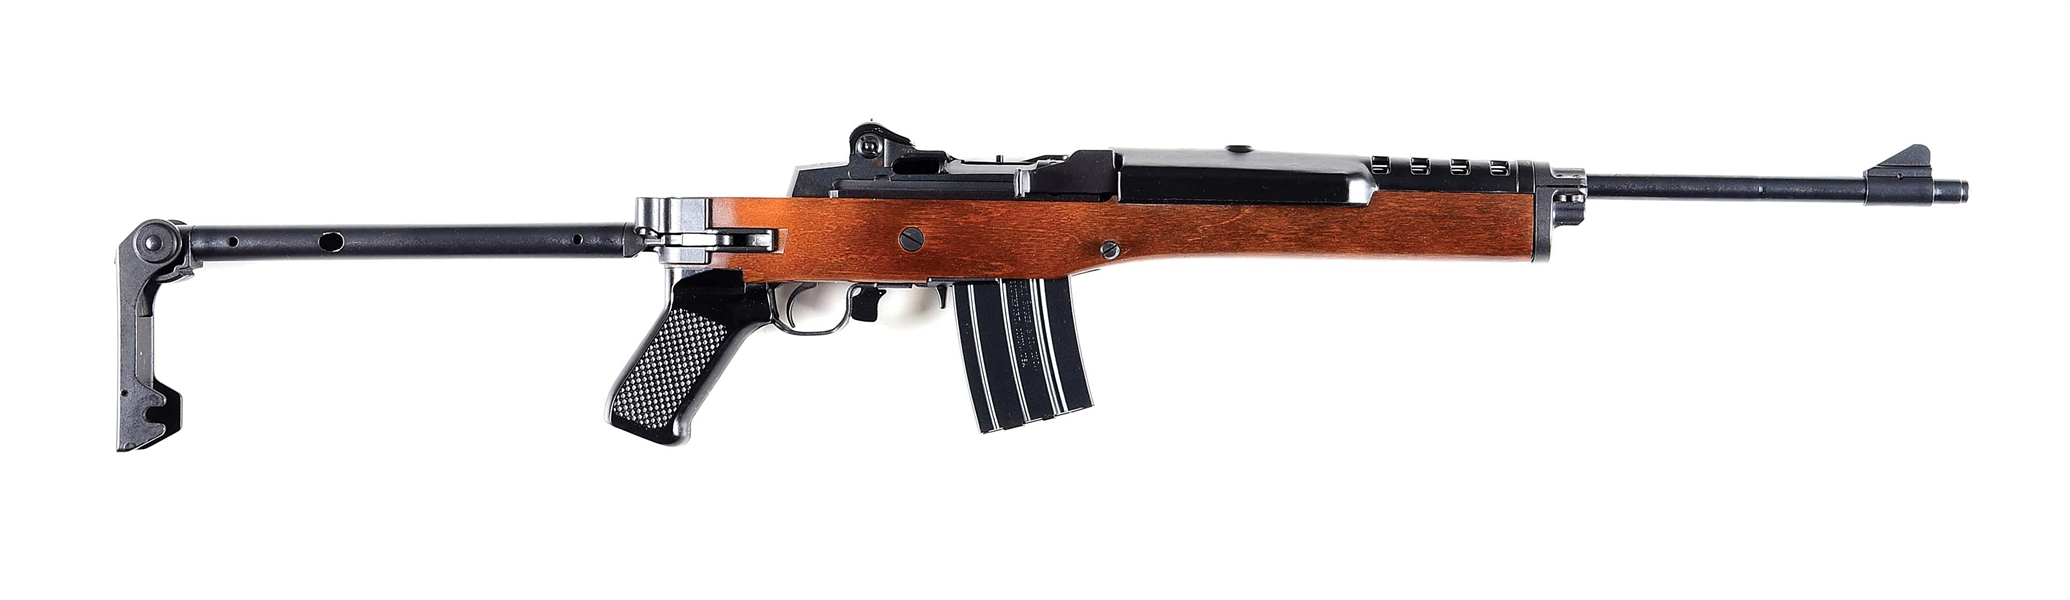 (M) PRE-BAN RUGER MINI-14/5F SEMI-AUTO RIFLE WITH FACTORY LETTER.